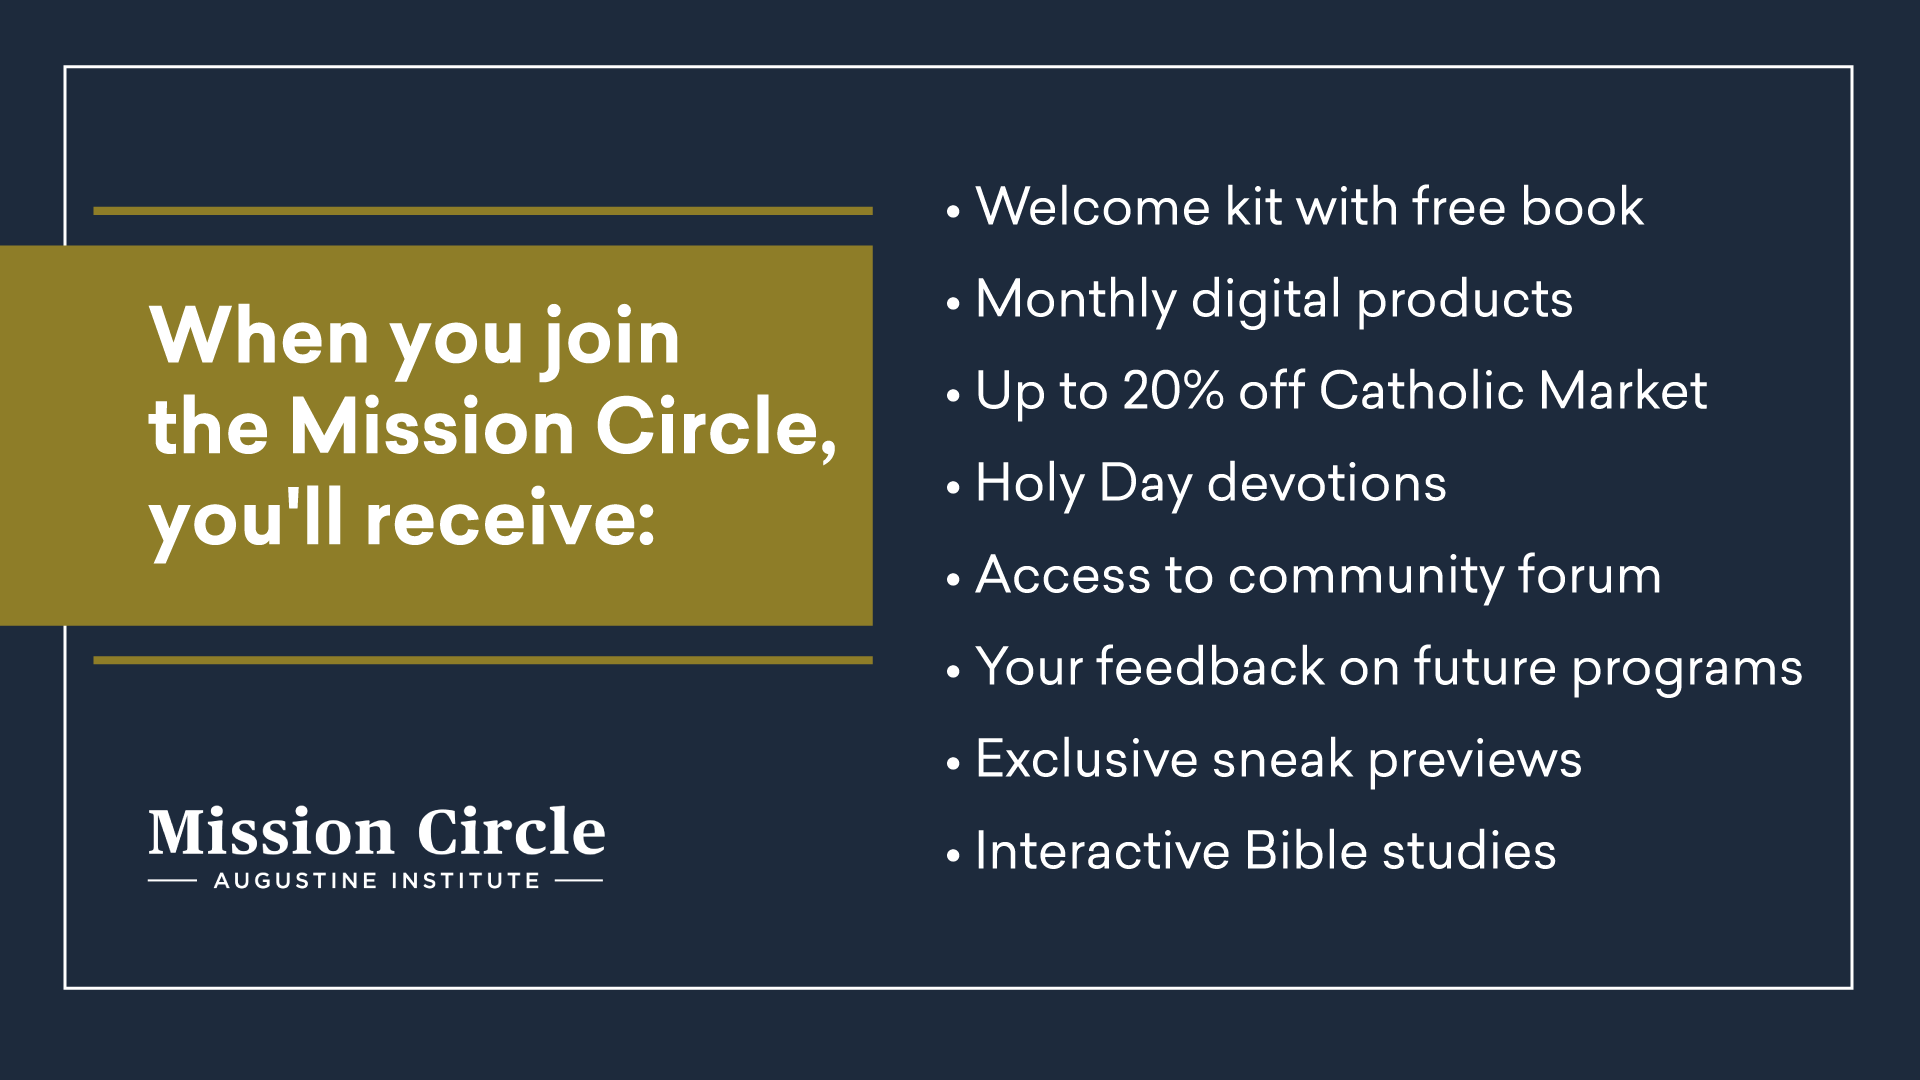 Benefits of Mission Circle